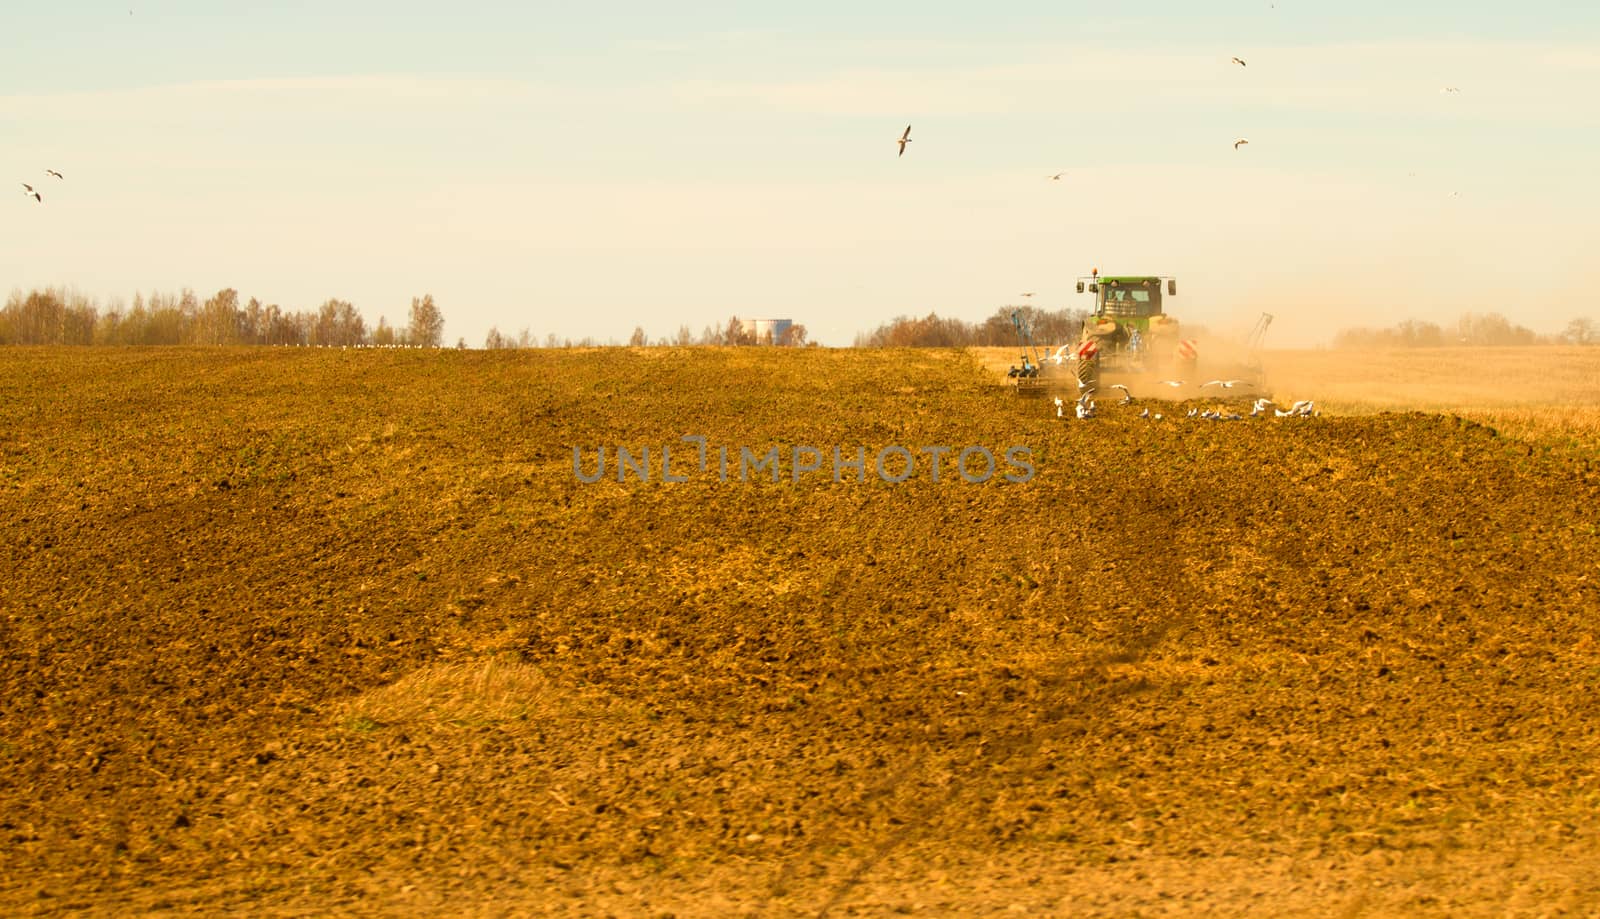 spring plowing fields by max51288